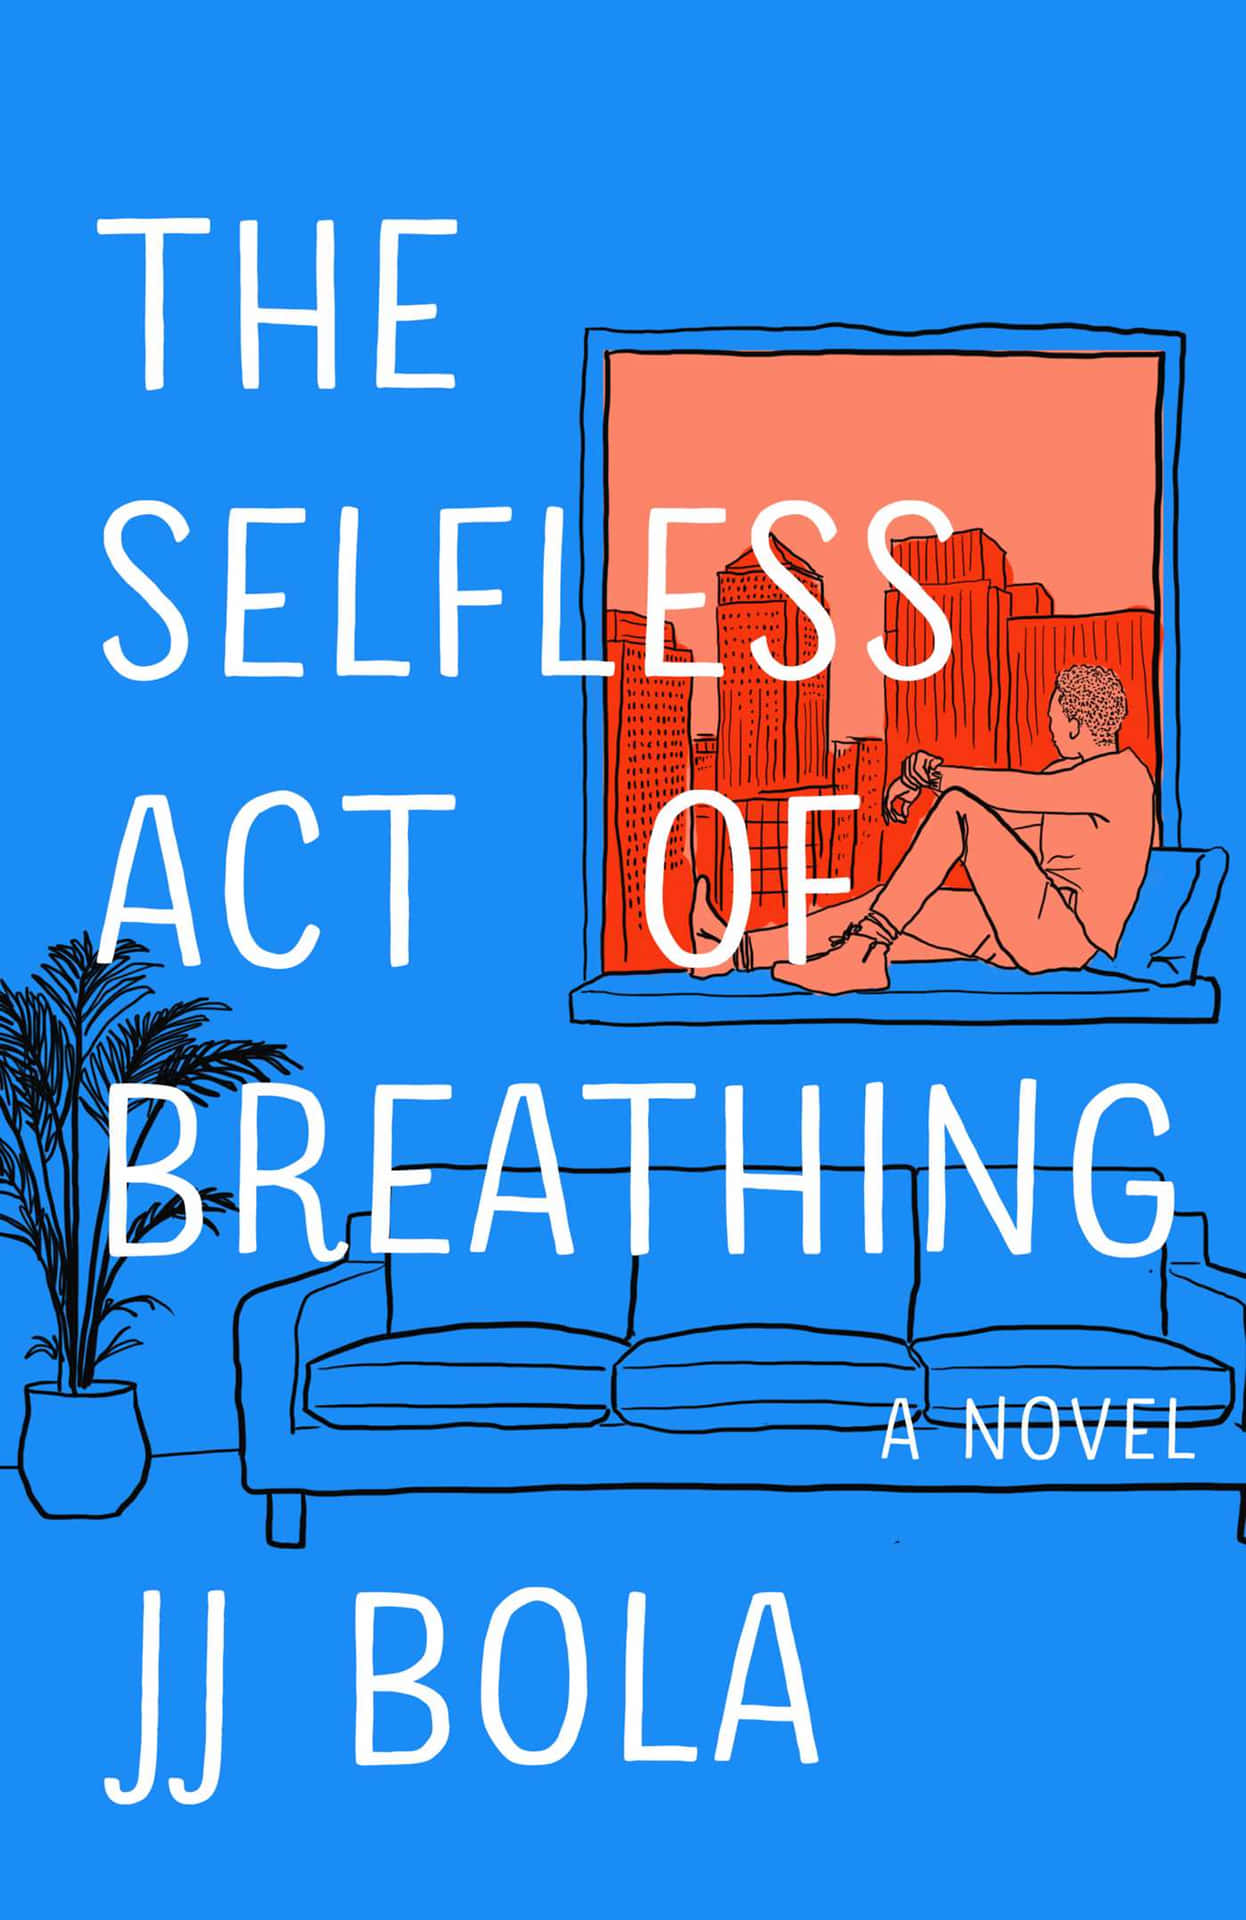 An Inspiring Cover Art of The Novel "The Selfless Act of Breathing" Wallpaper